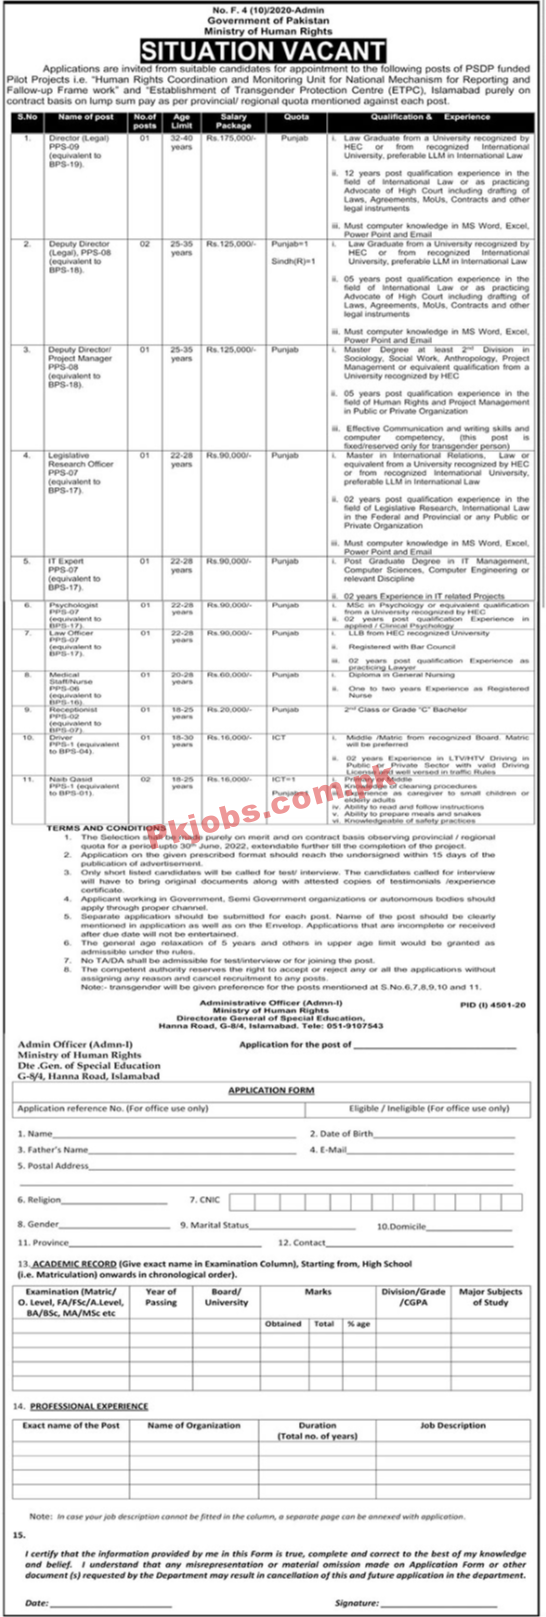 Ministry of Human Rights Management PK Jobs 2021